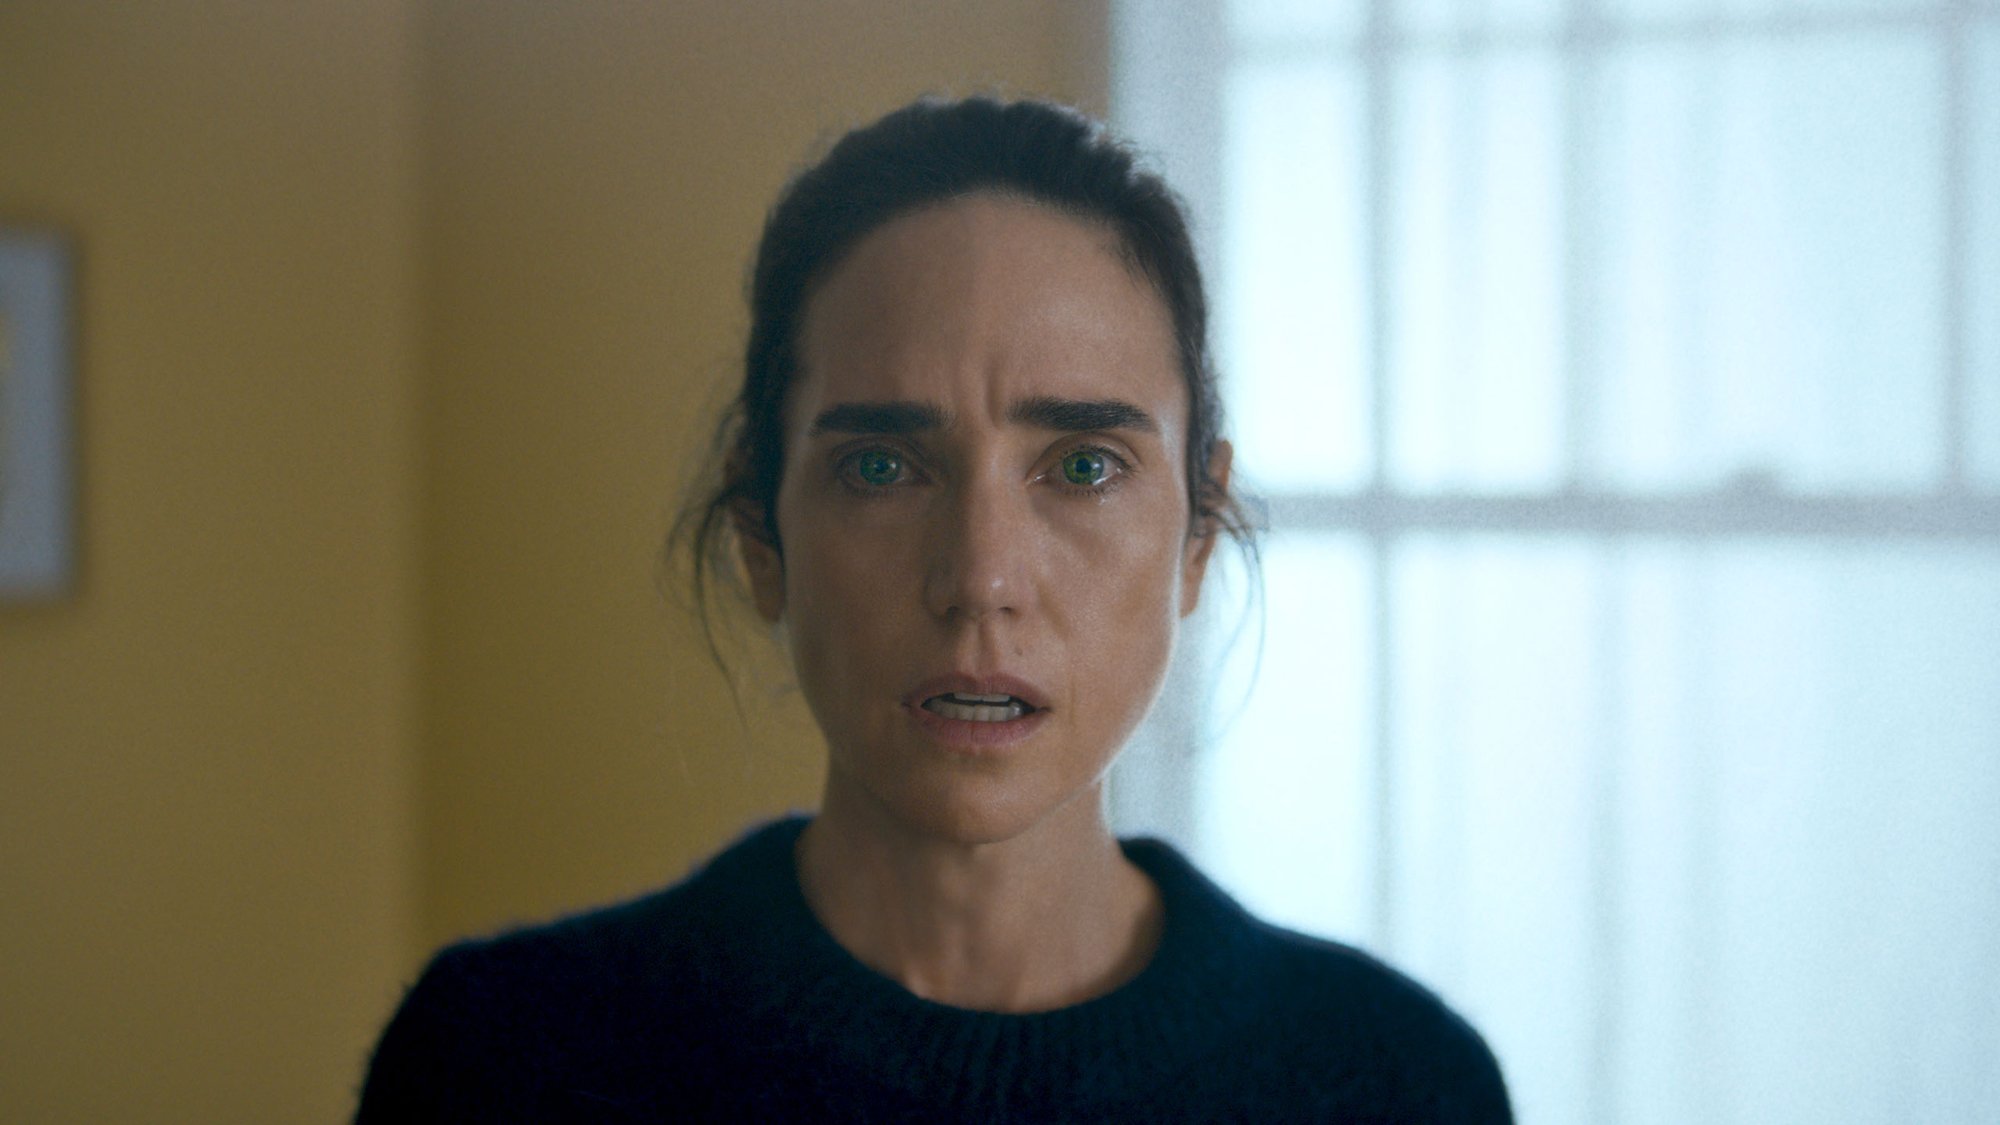 'Bad Behaviour' Jennifer Connelly as Lucy looking upset with tears rolling down her face